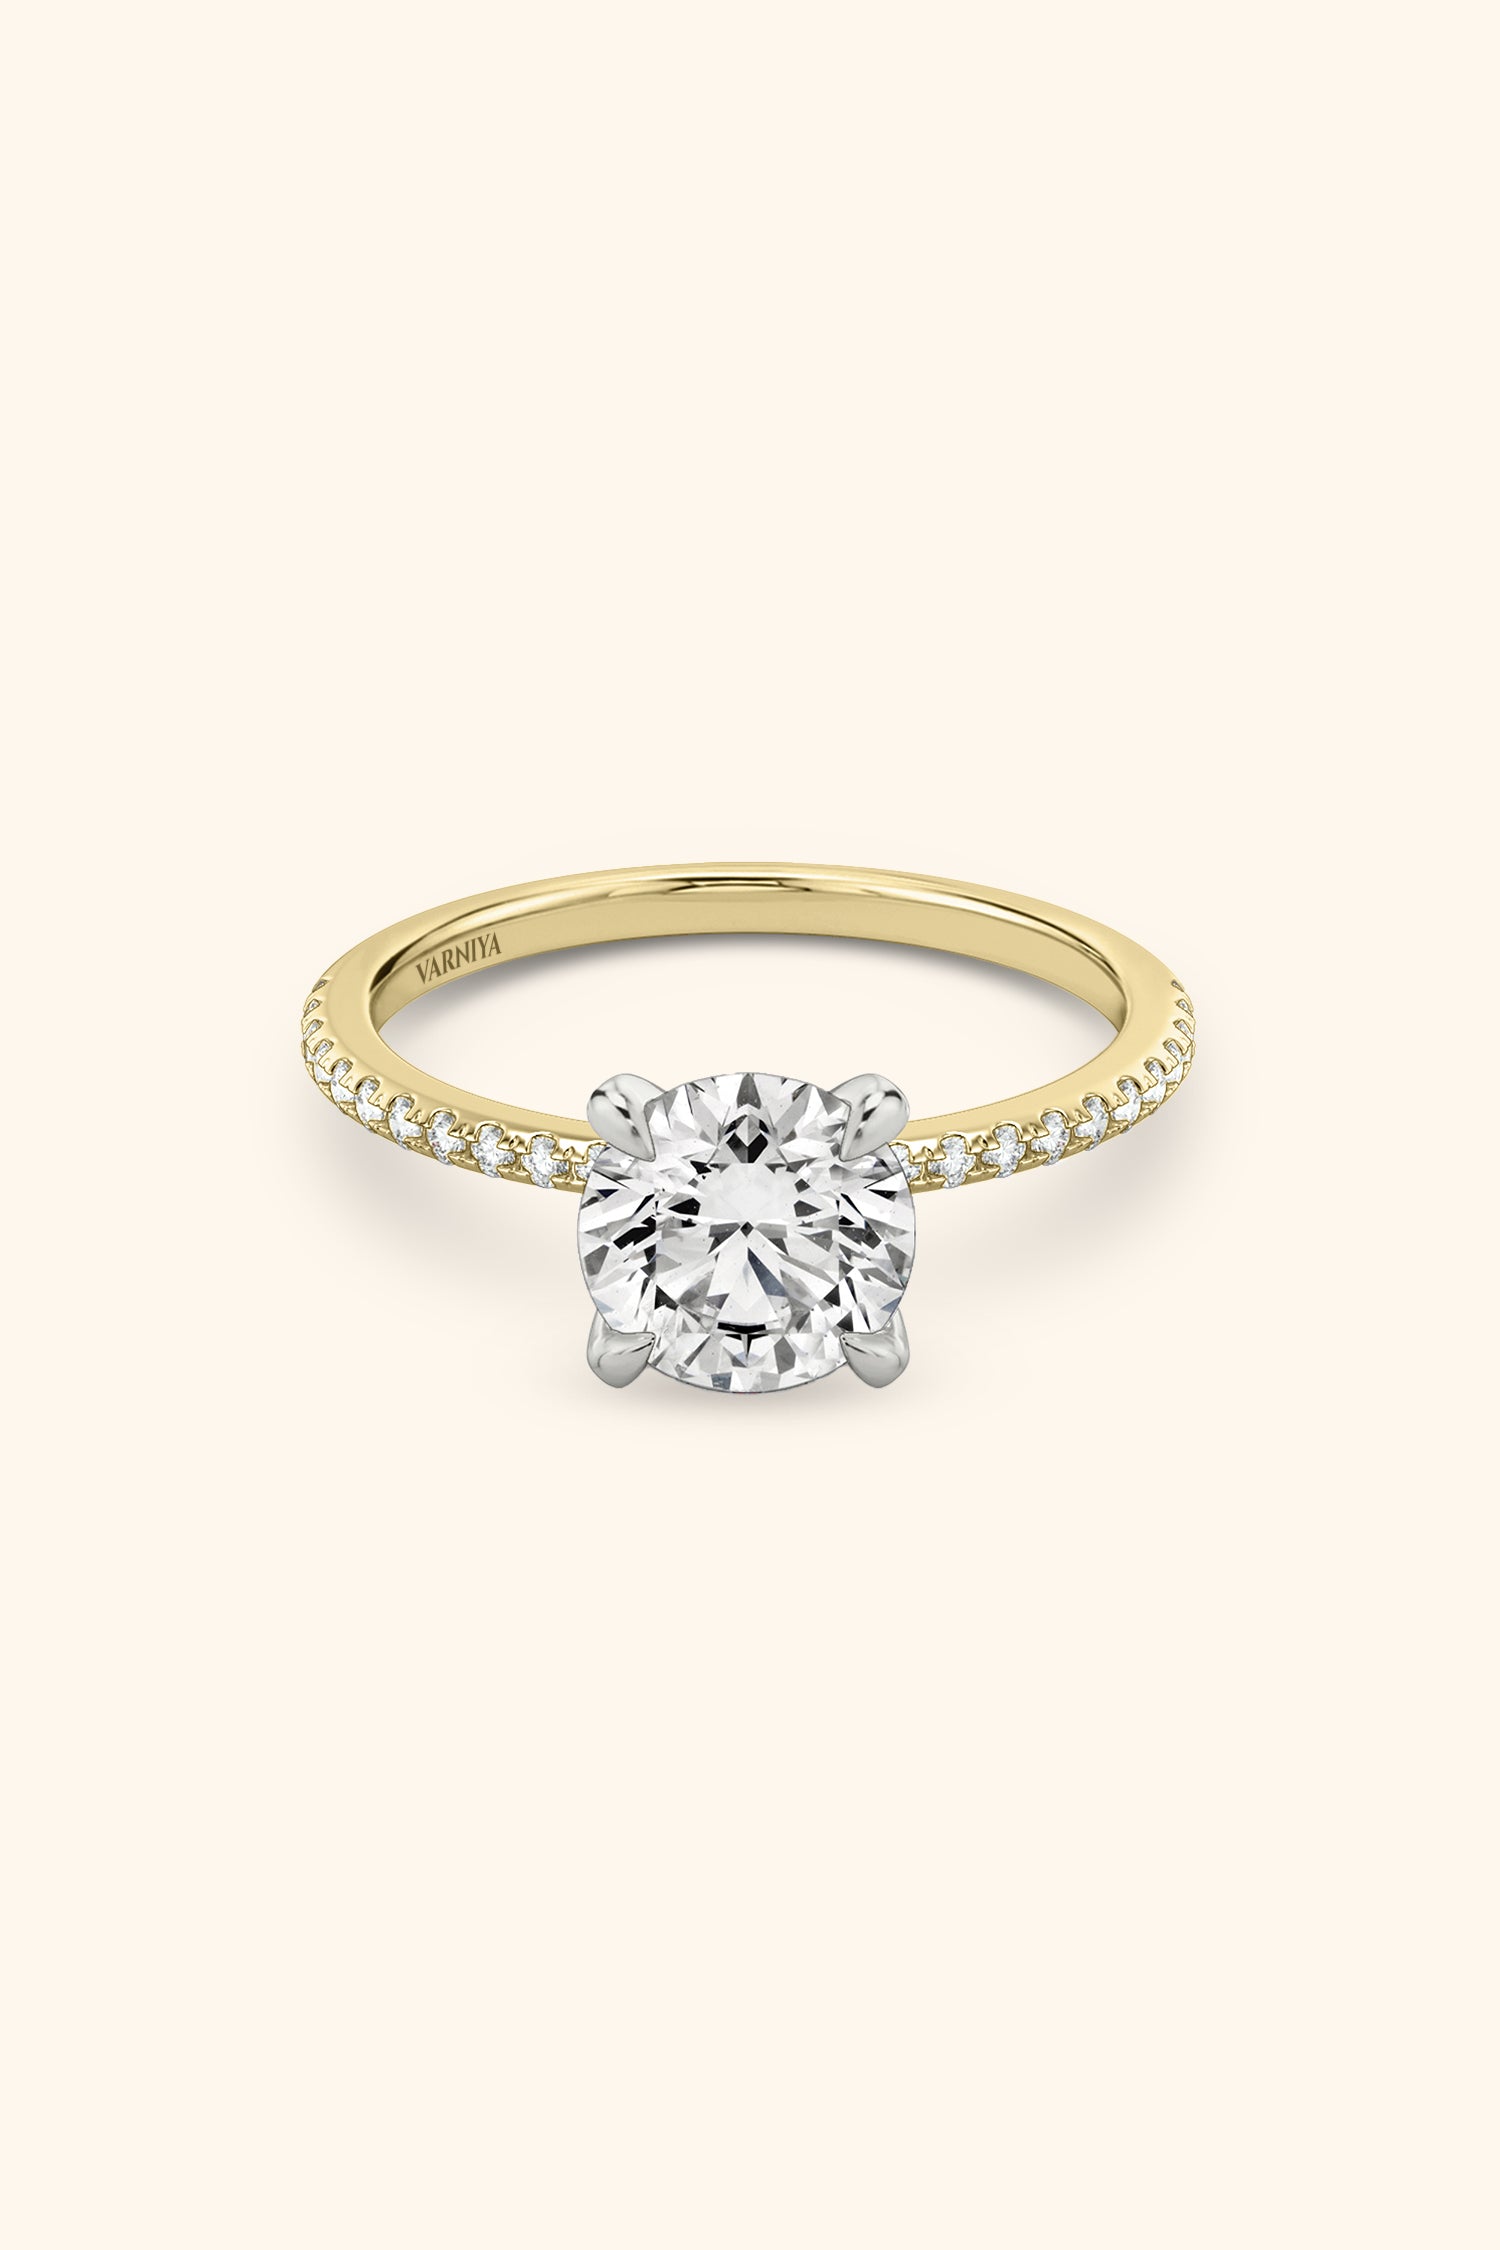 Dual Tone Glance Pave Ring with 4 Carat Round Brilliant Solitaire